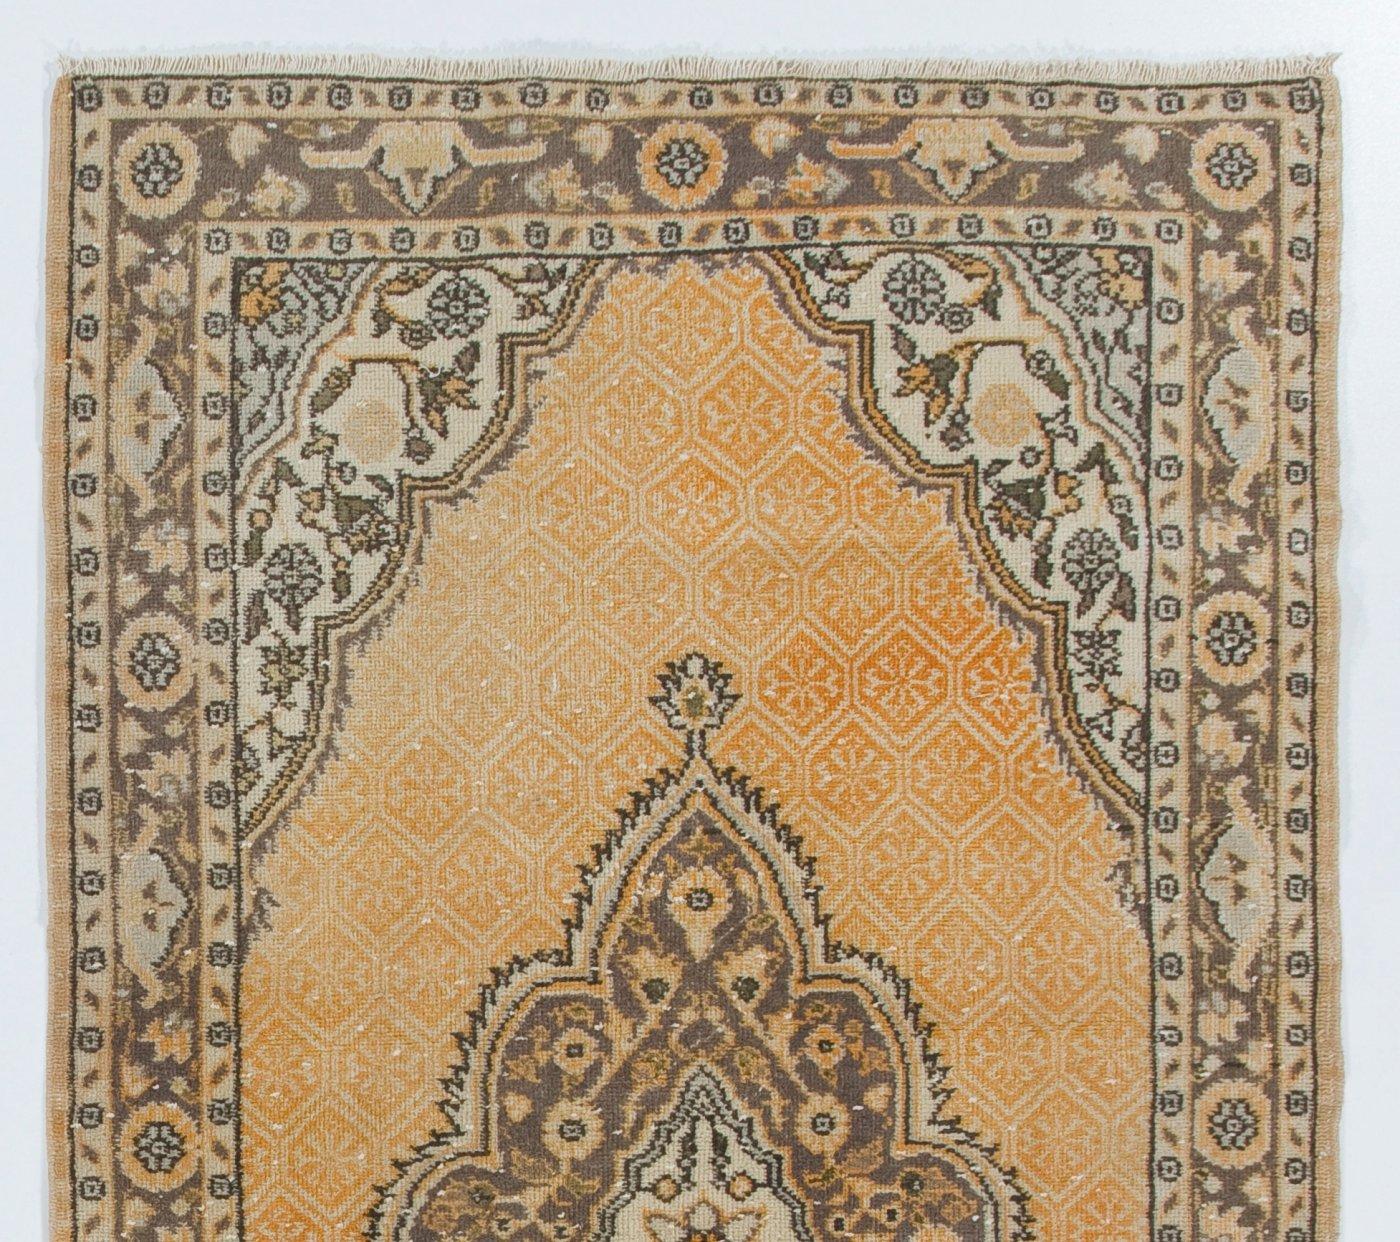 A finely hand-knotted vintage Turkish carpet from 1960s featuring a geometric medallion design. The rug has even low wool pile on cotton foundation. It is heavy and lays flat on the floor, in very good condition with no issues. It has been washed